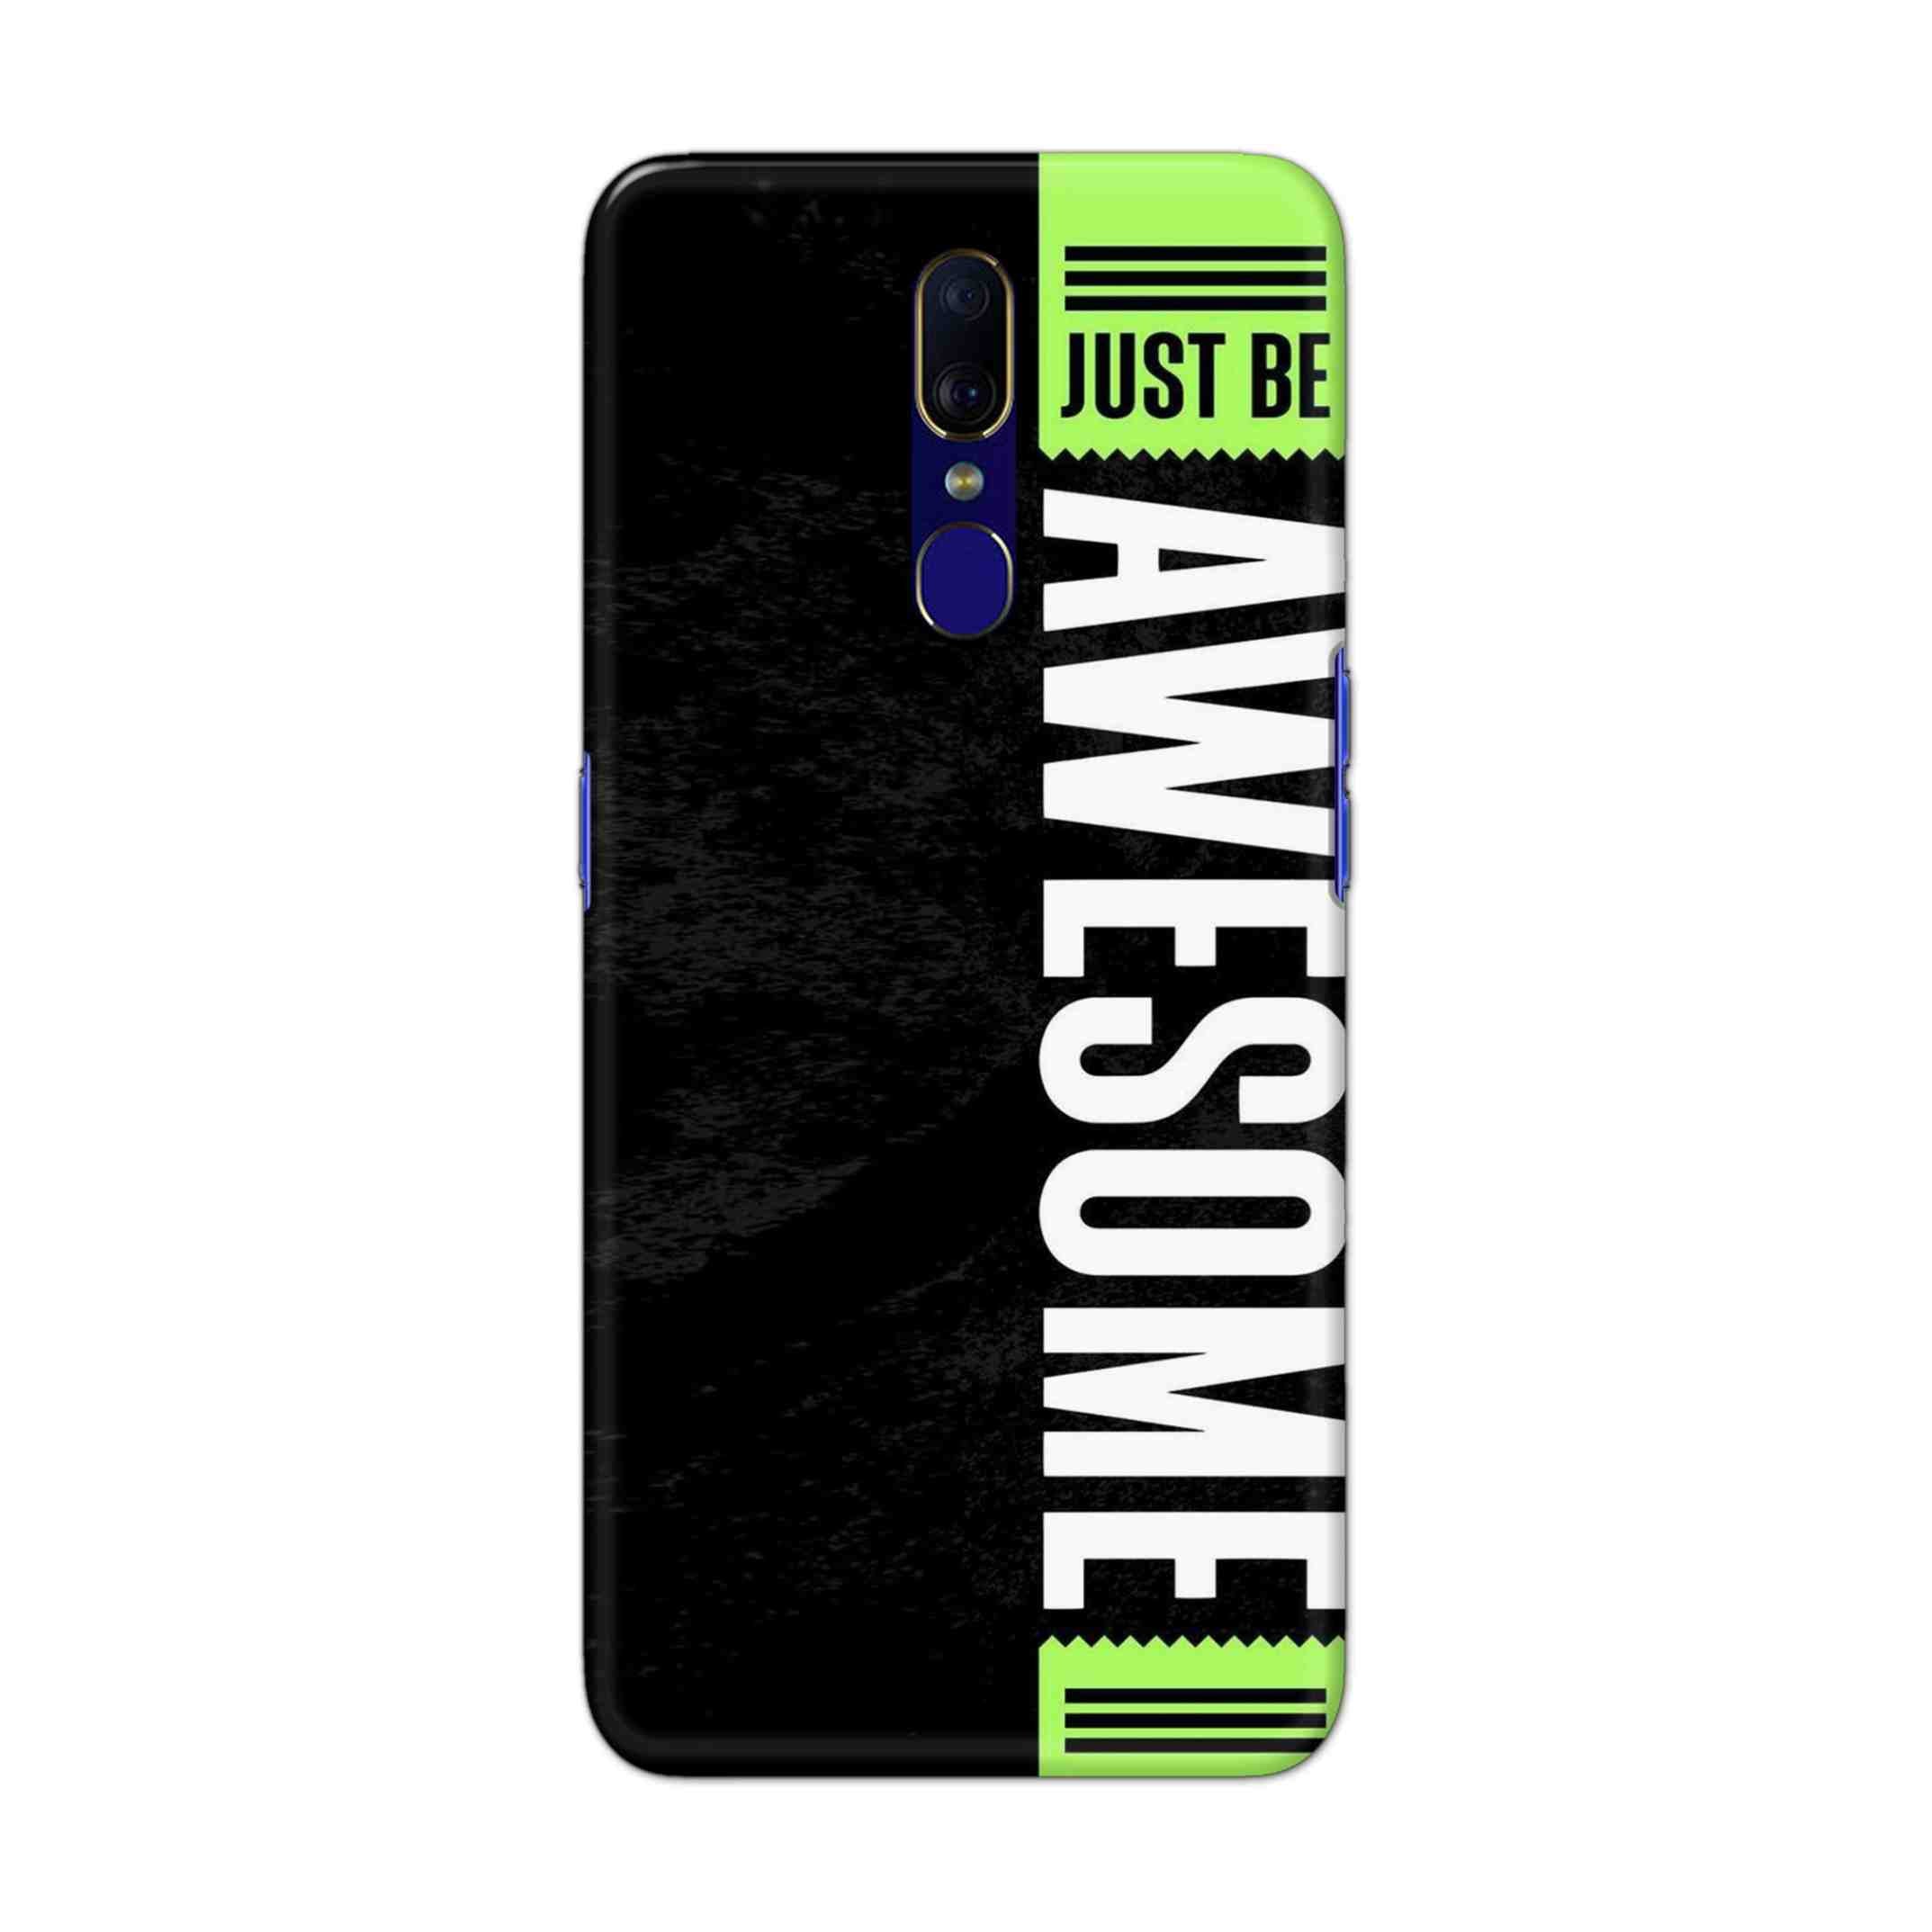 Buy Awesome Street Hard Back Mobile Phone Case Cover For OPPO F11 Online